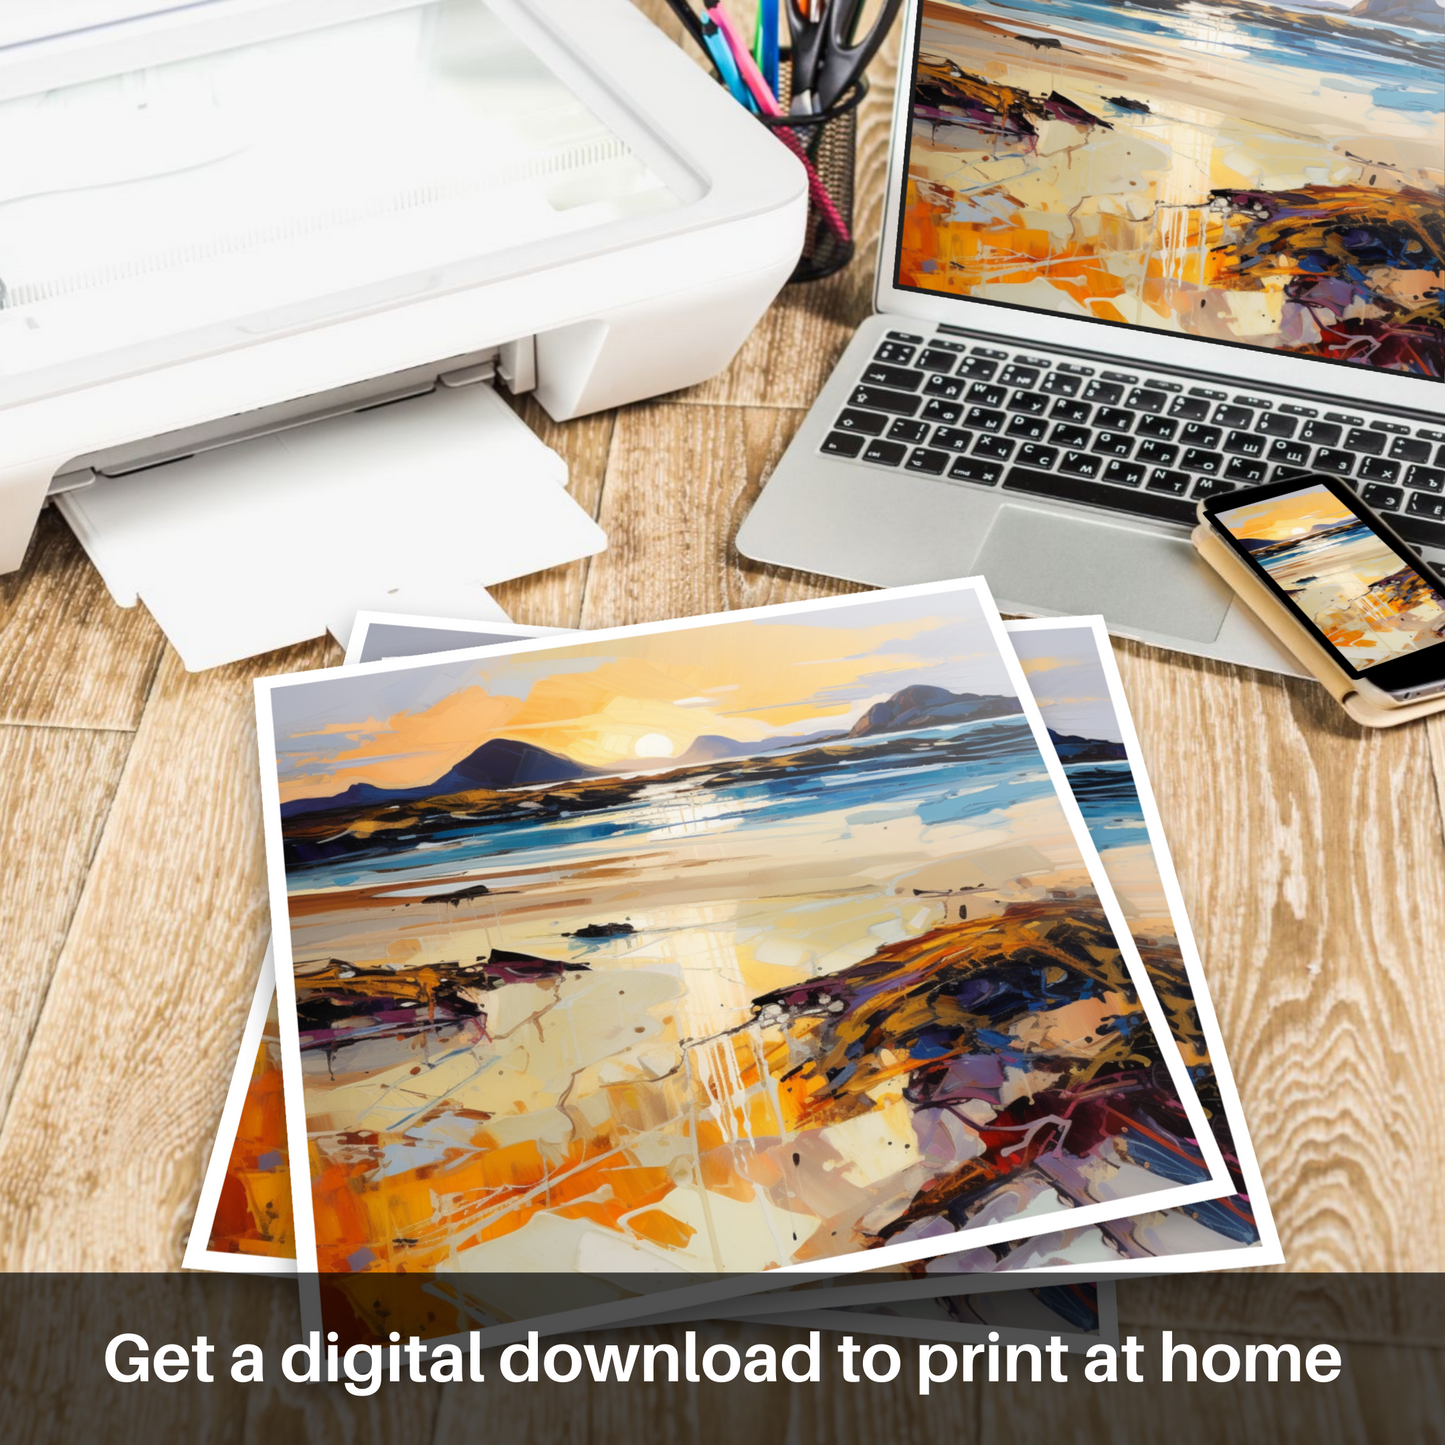 Downloadable and printable picture of Mellon Udrigle Beach at golden hour